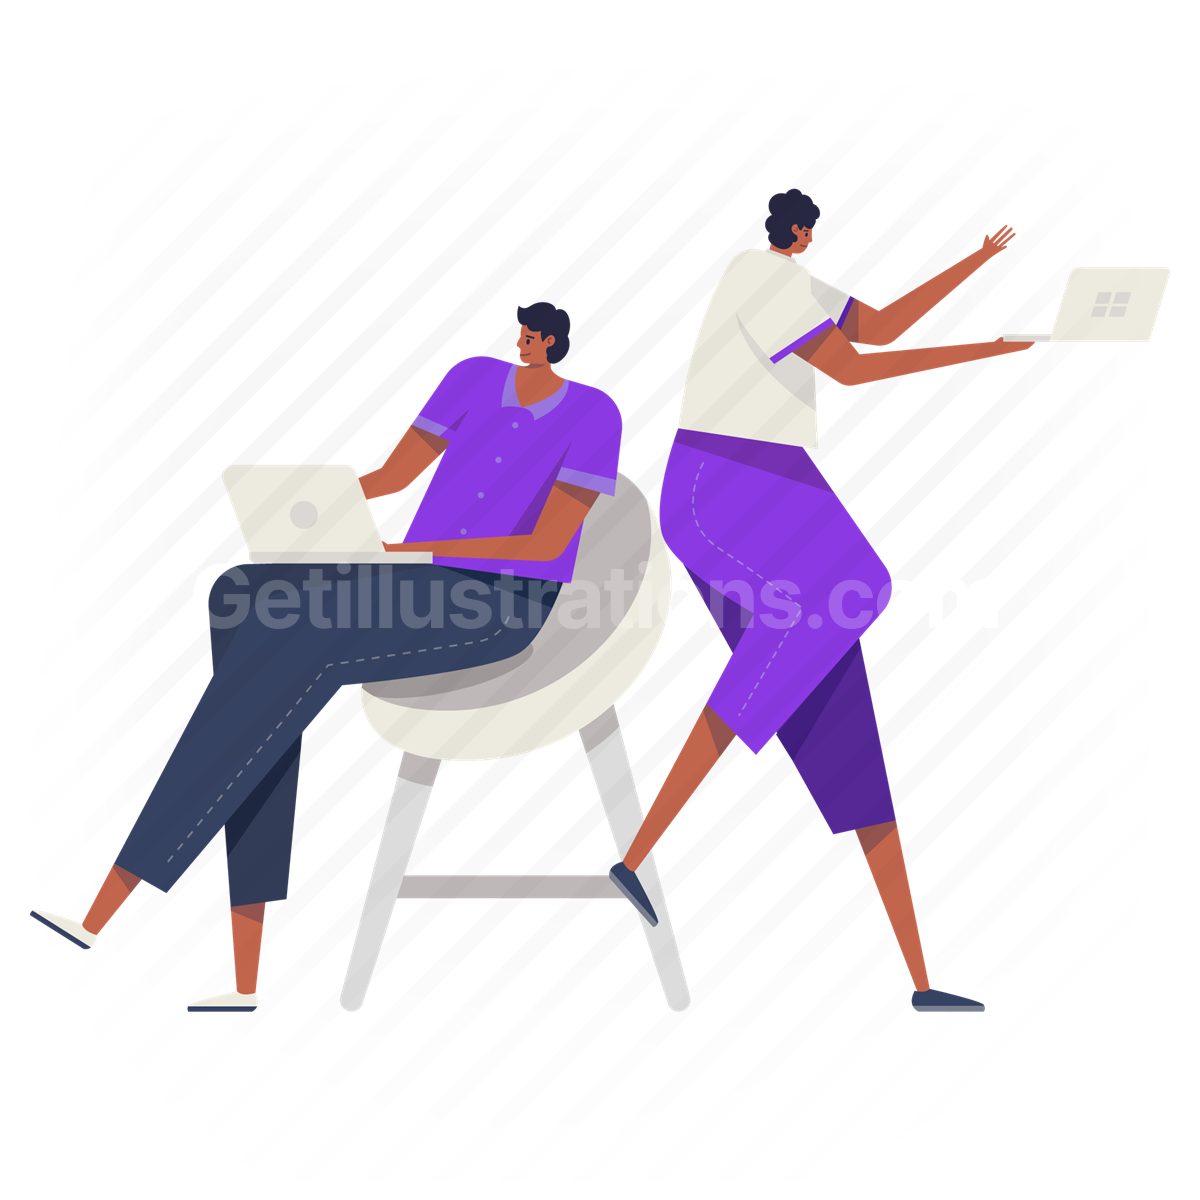 working together, computer, laptop, electronic, device, chair, furniture